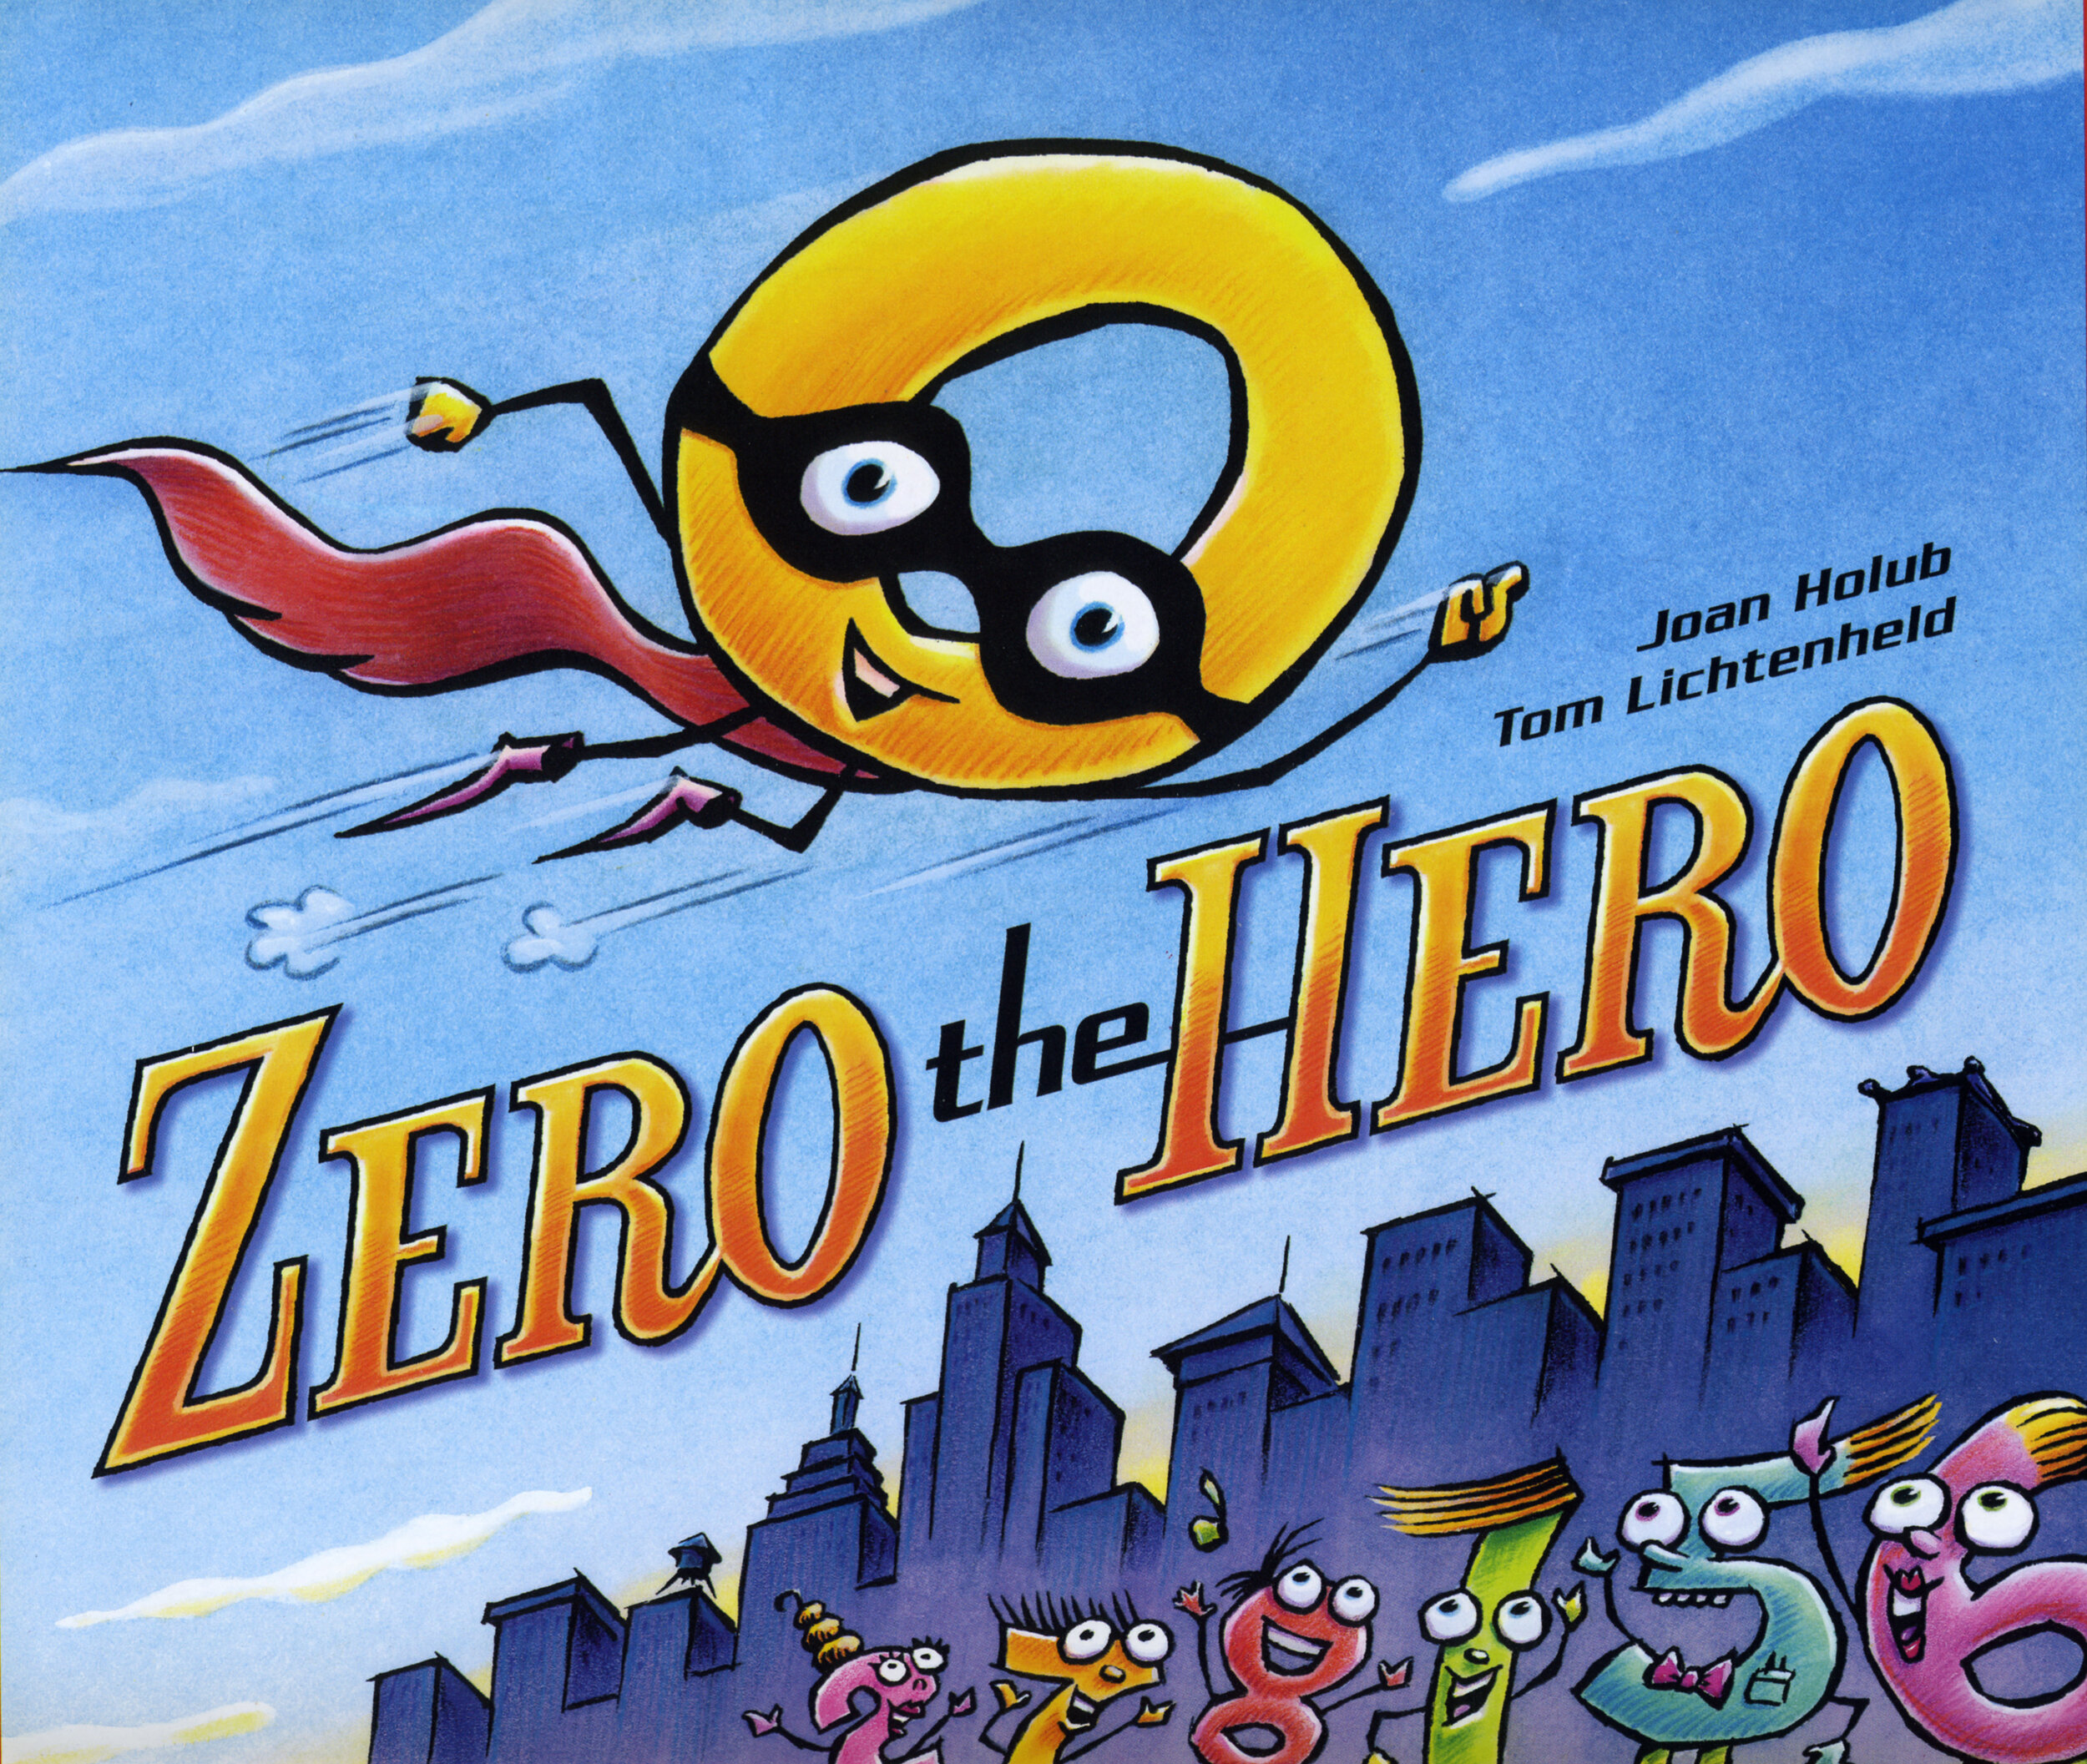 Zero the Hero, a picture book by Joan Holub and Tom Lichtenheld